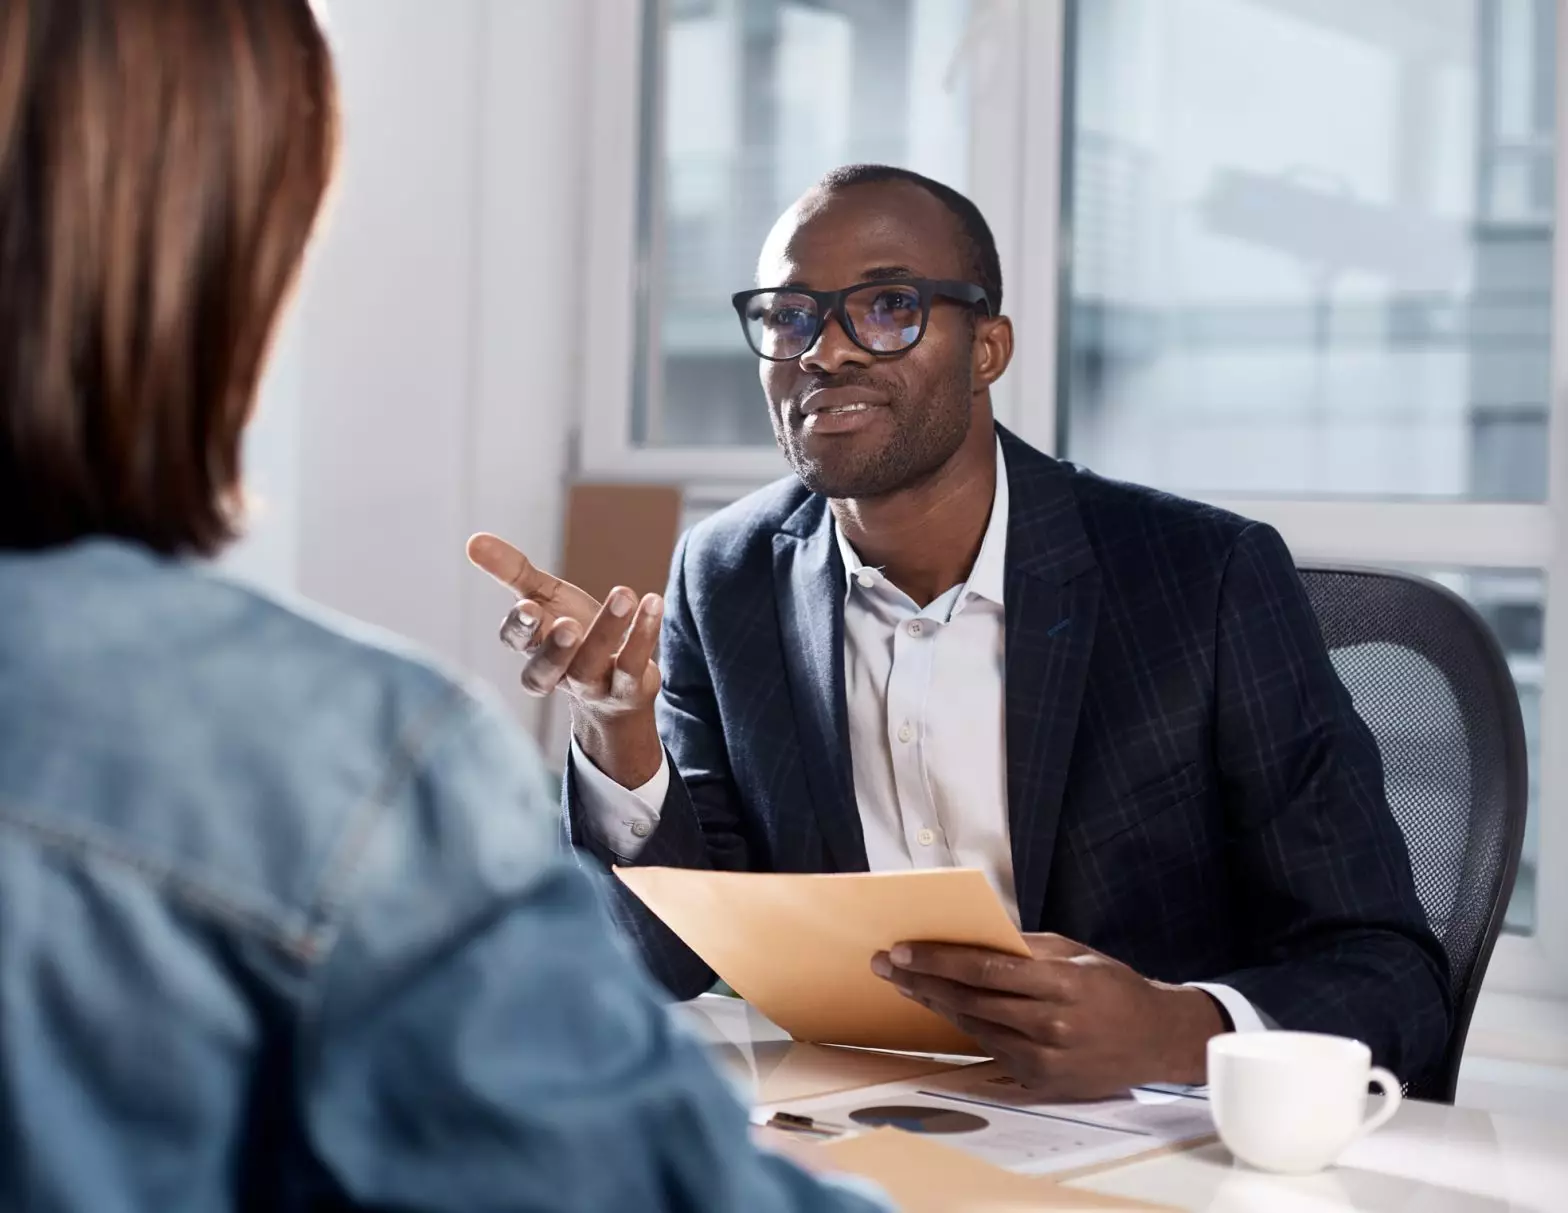 Hiring Interviews: Avoid Asking These Unacceptable Questions